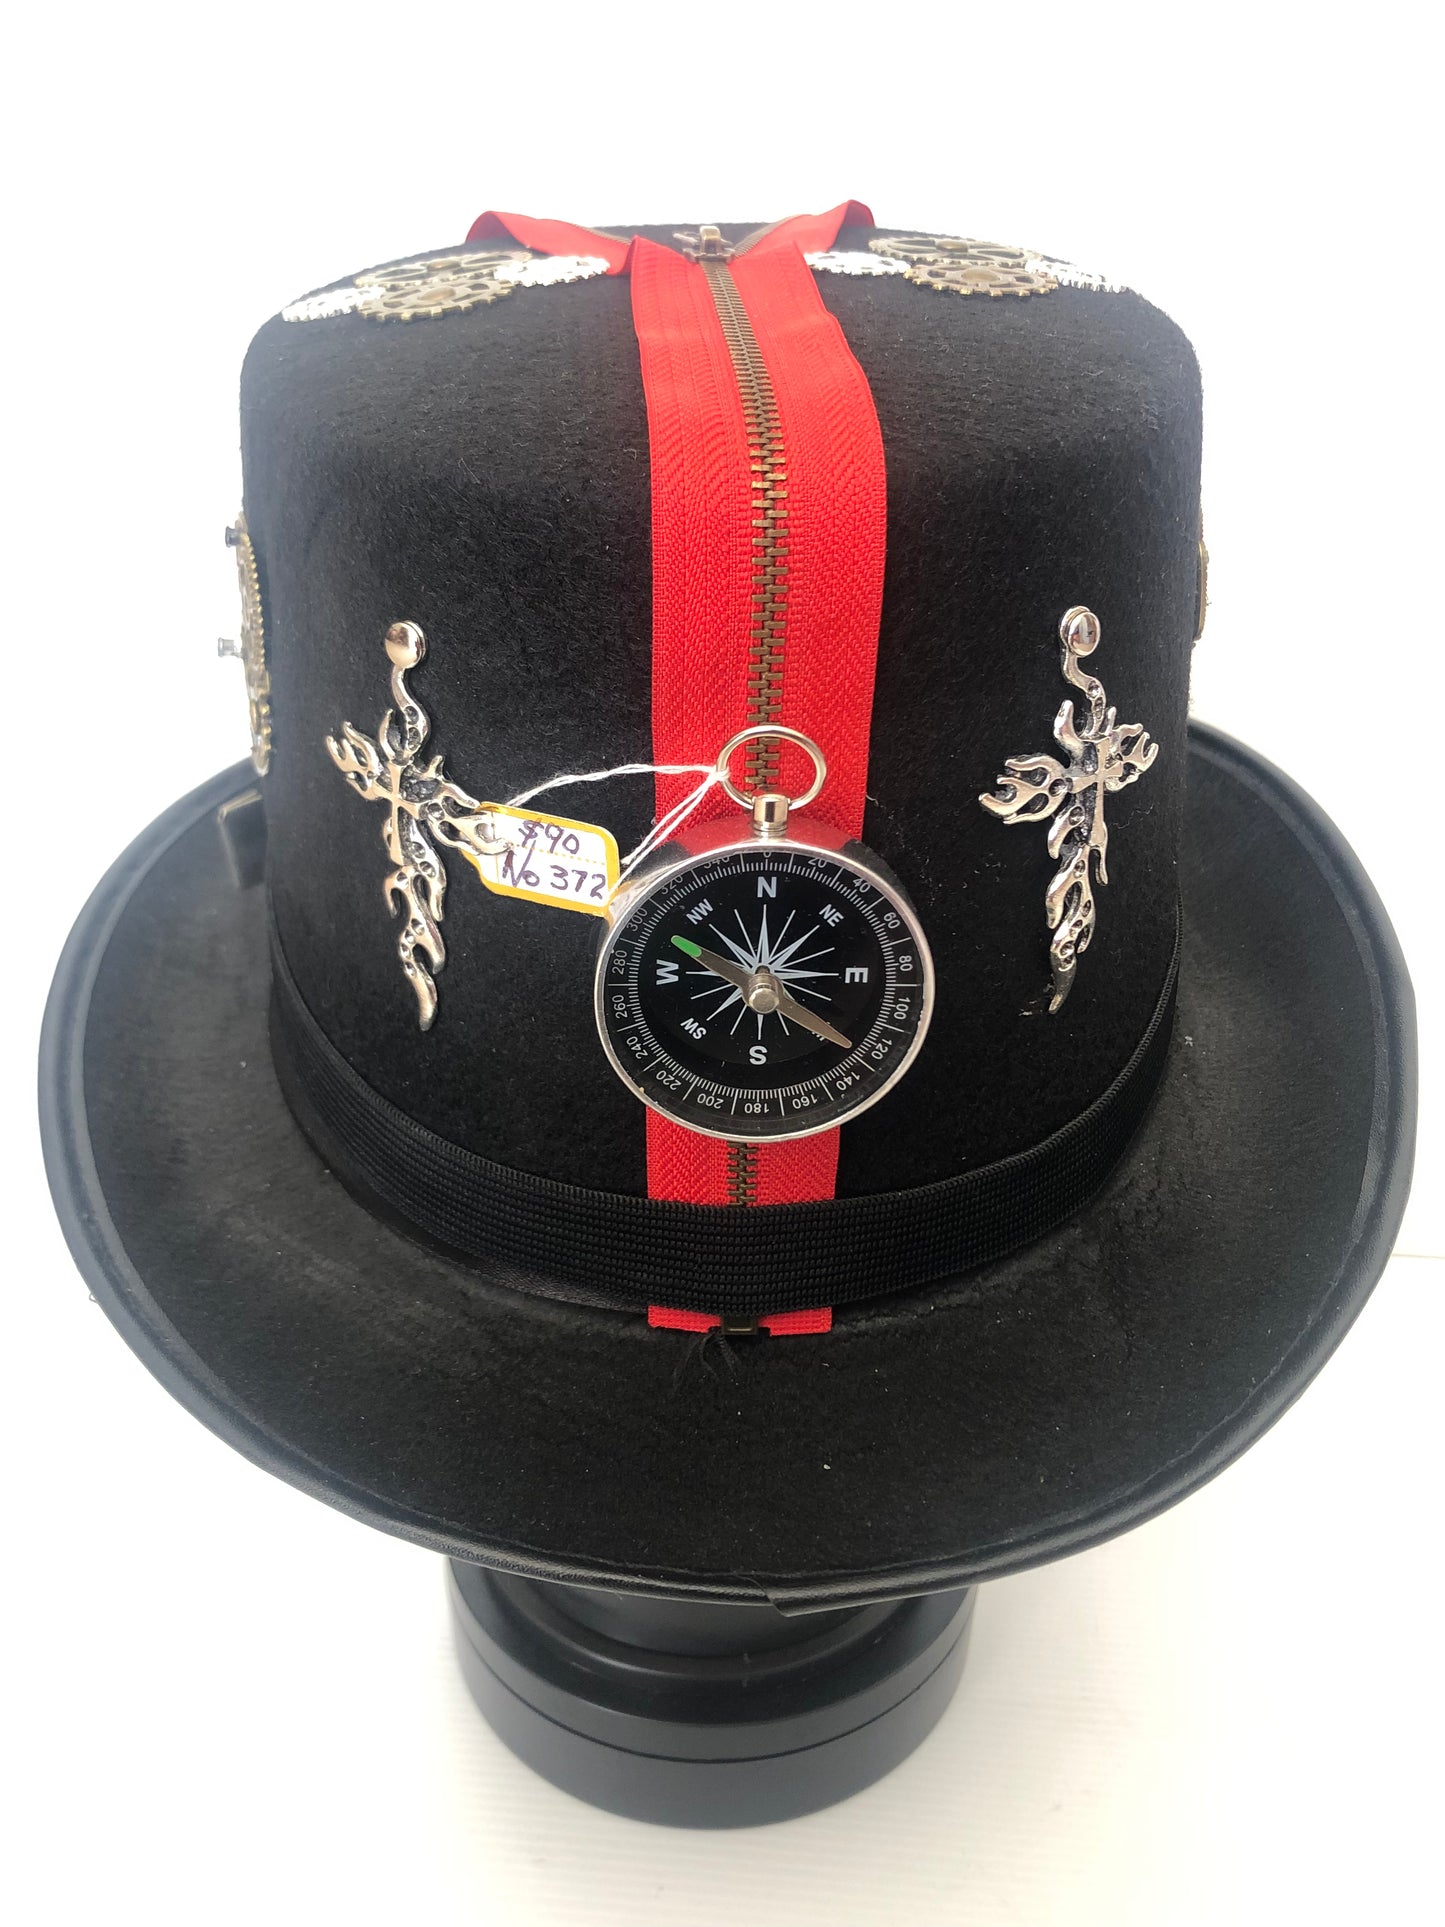 Steampunk Hat with Goggles (Item #372)